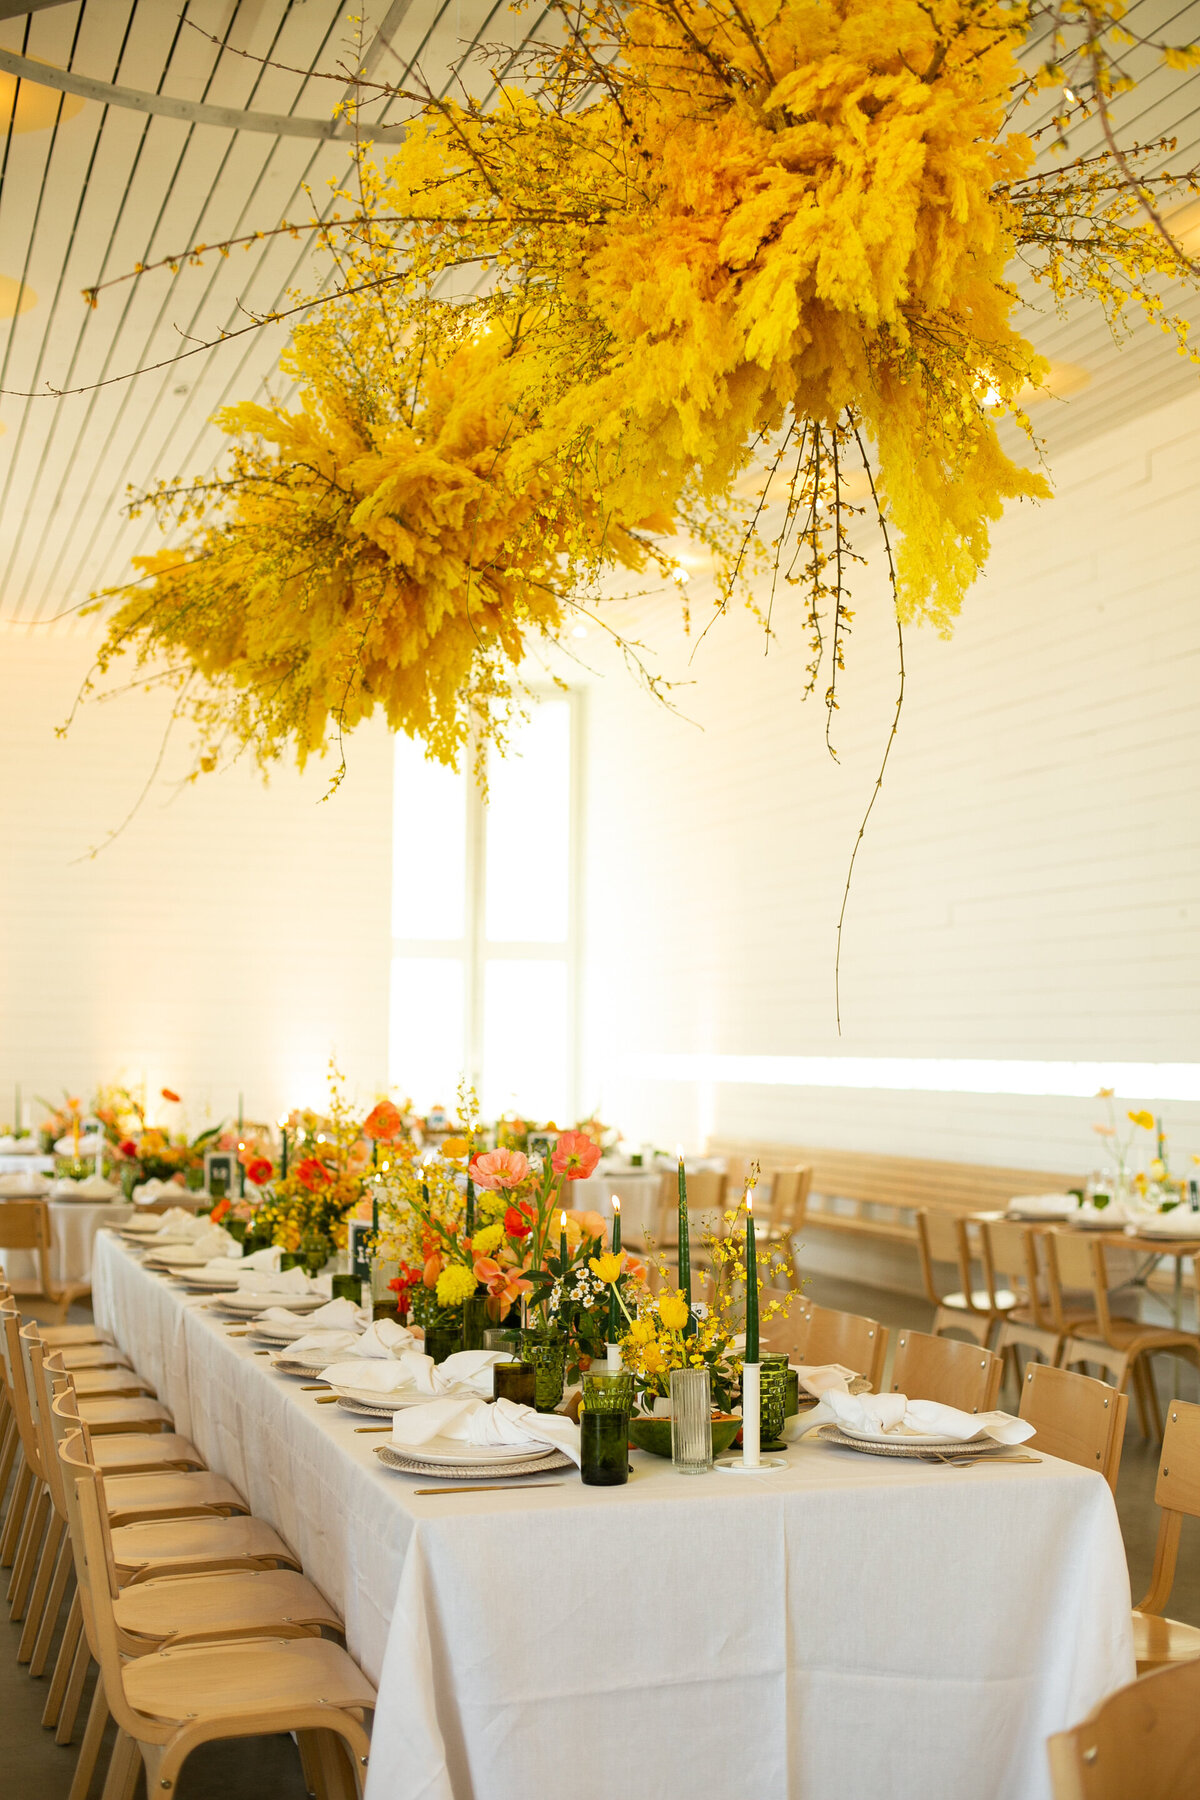 Floral ceiling installations in bright yellow hung above tables with reds and orange florals and green glasses.